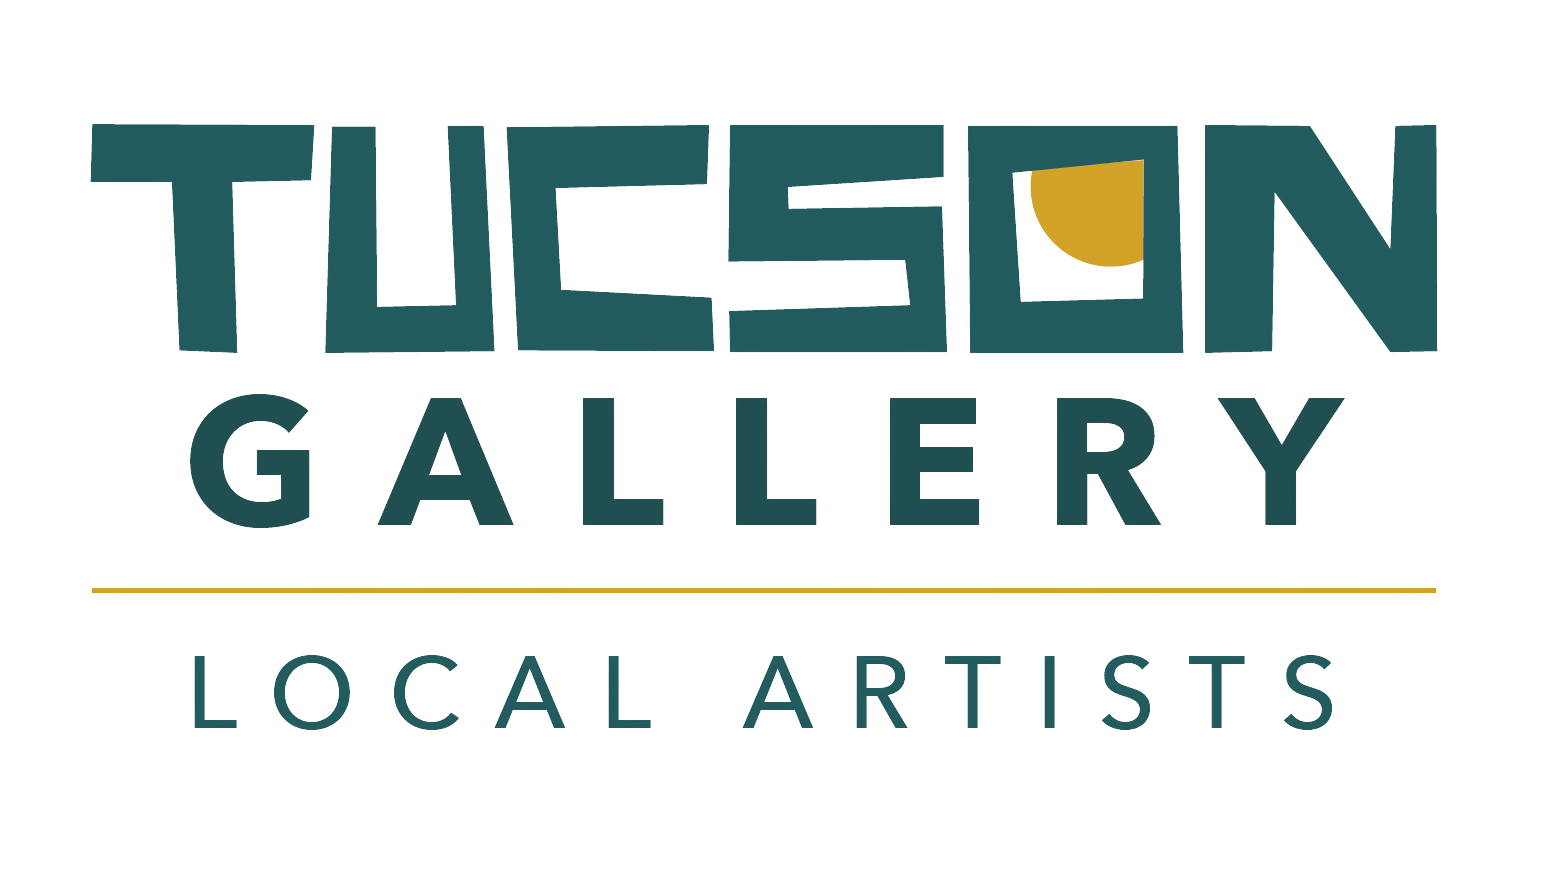 The Tucson Gallery